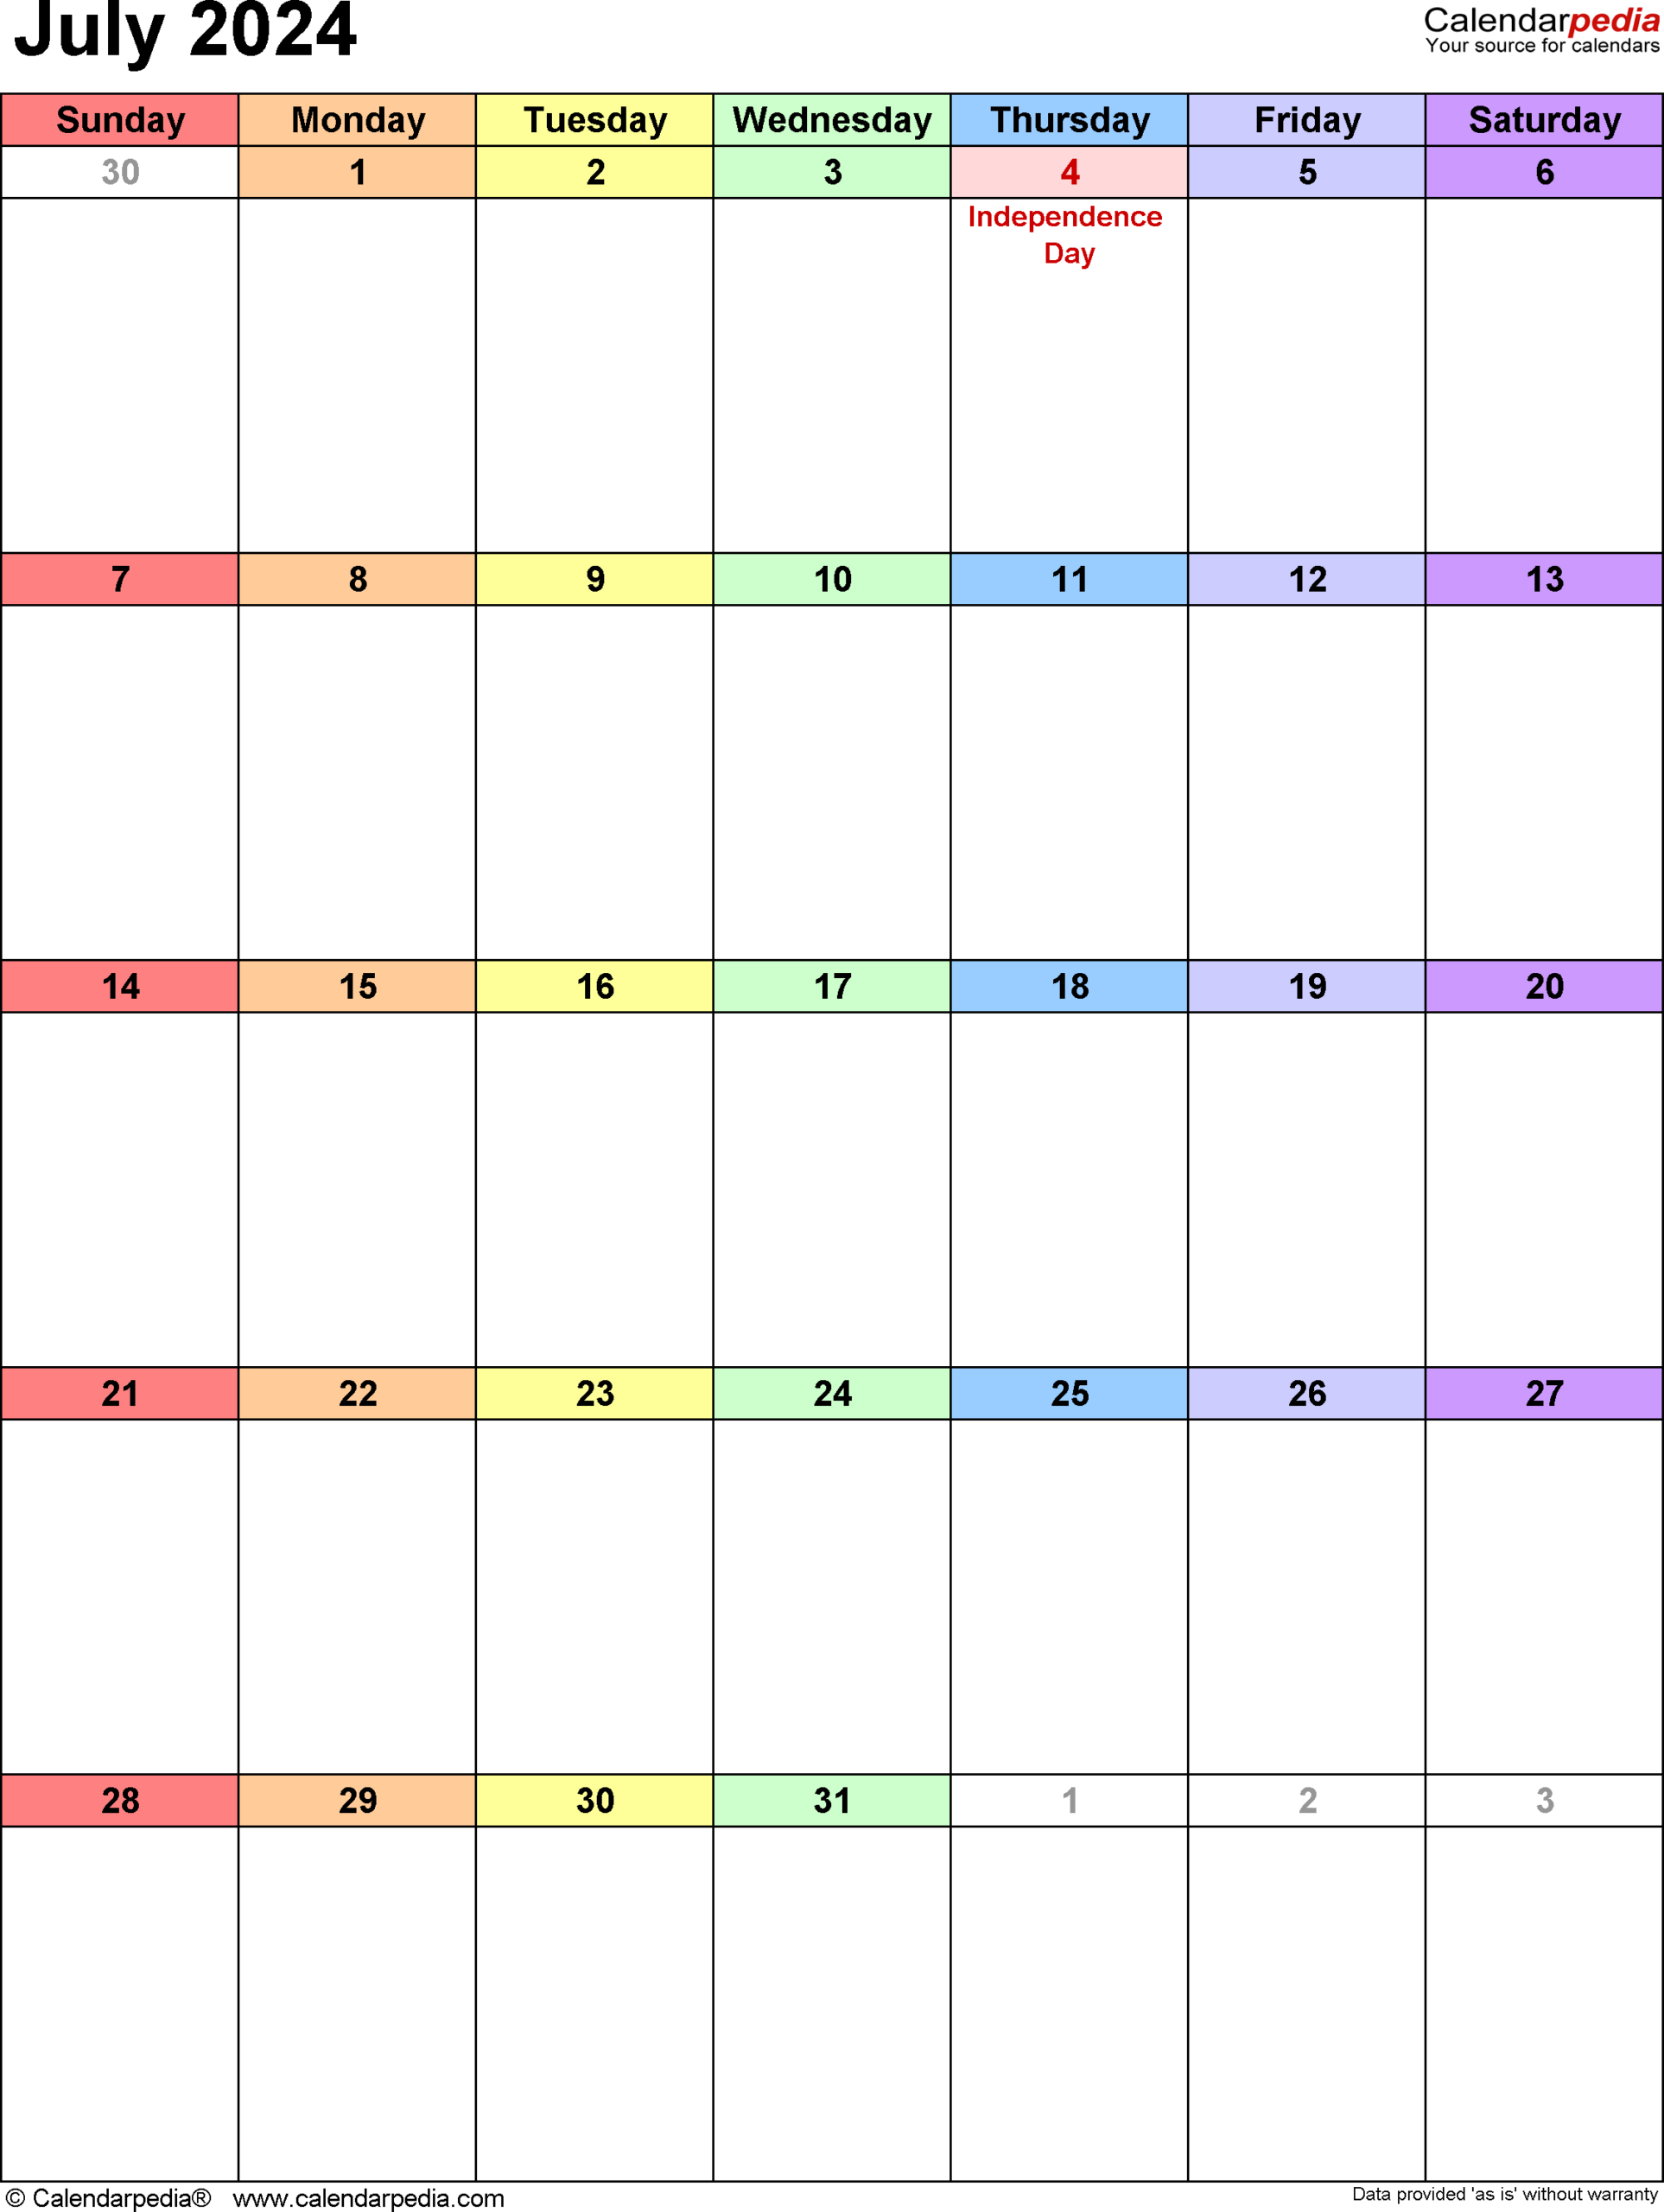 July 2024 Calendar | Templates For Word, Excel And Pdf for July 2024 Calendar Portrait